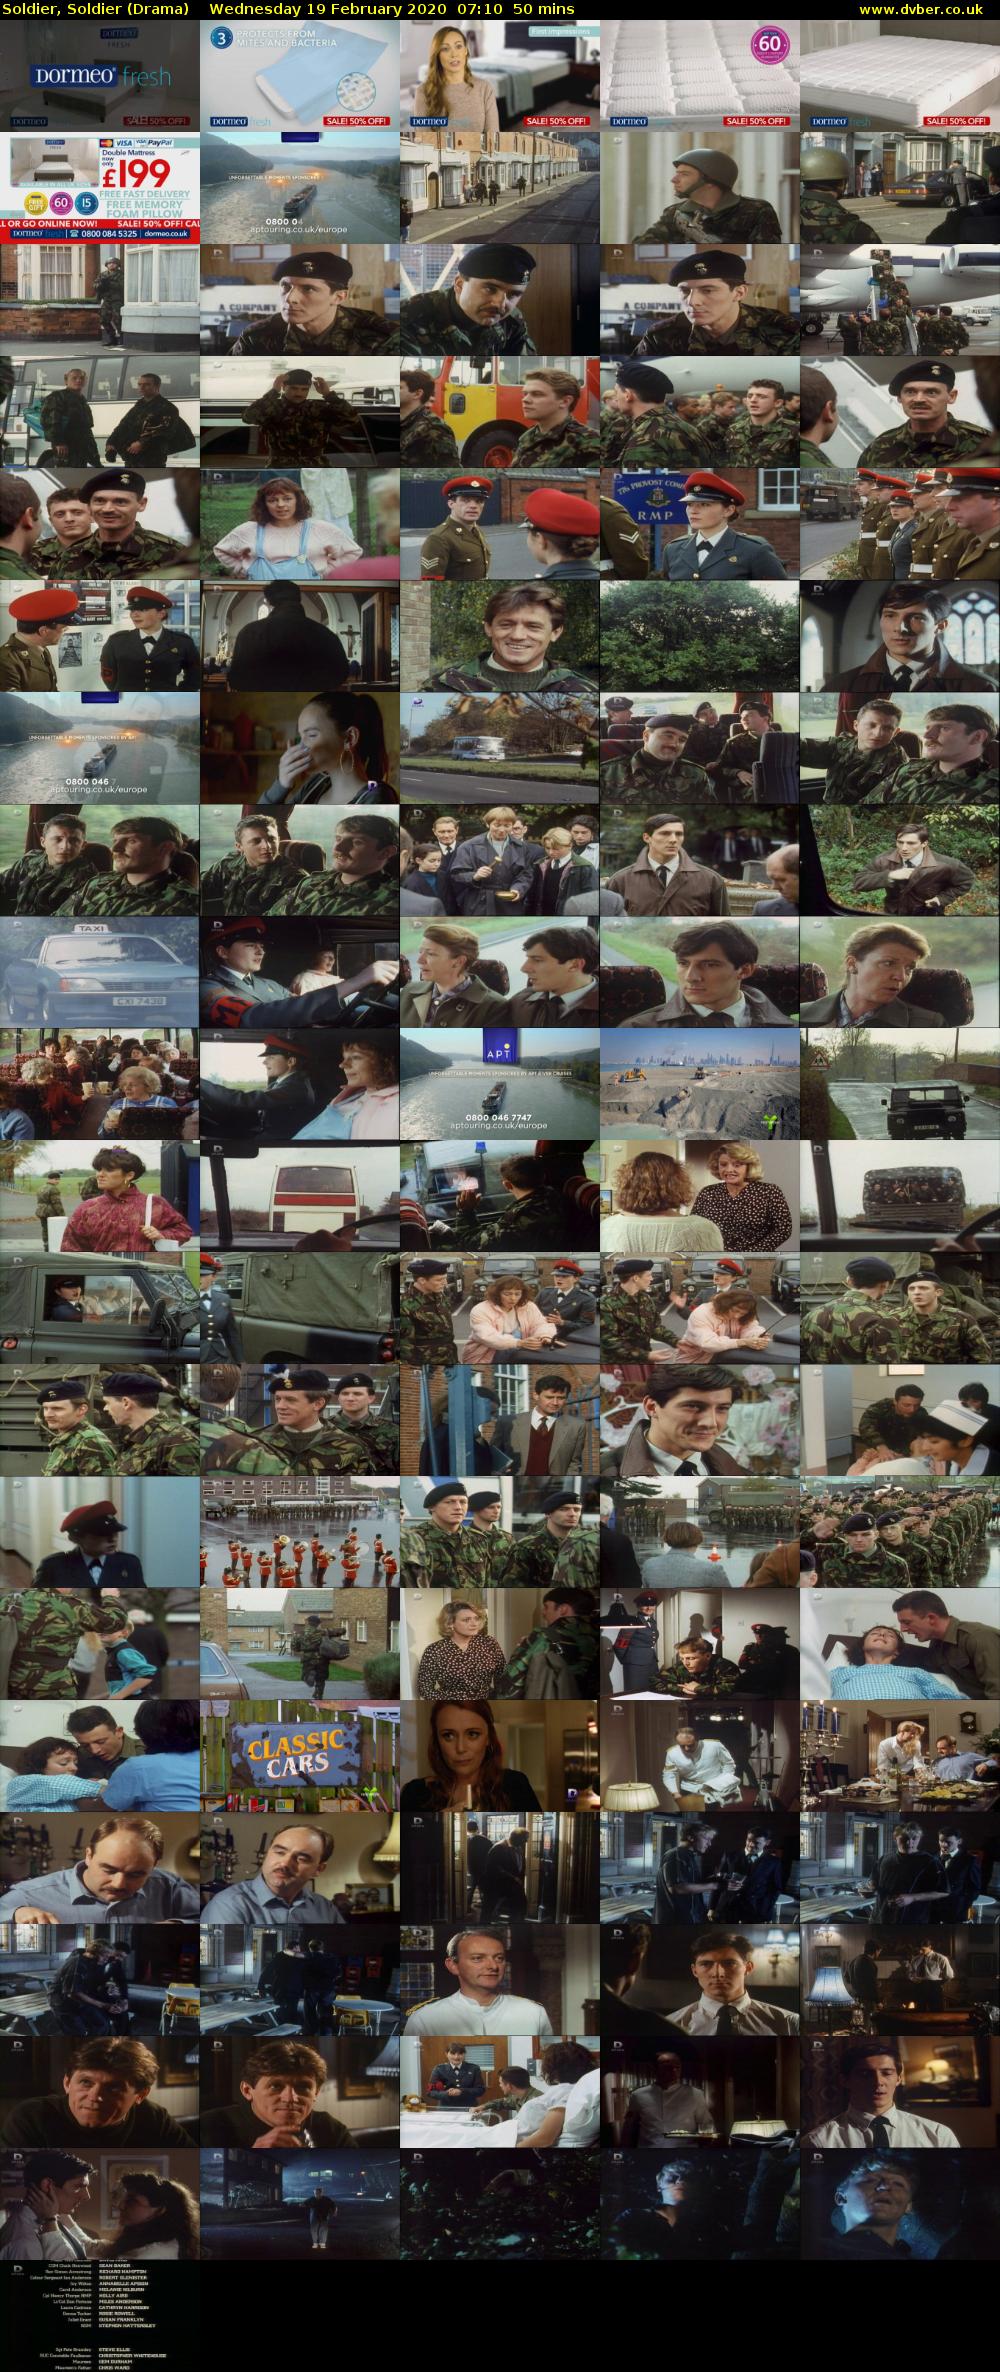 Soldier, Soldier (Drama) Wednesday 19 February 2020 07:10 - 08:00